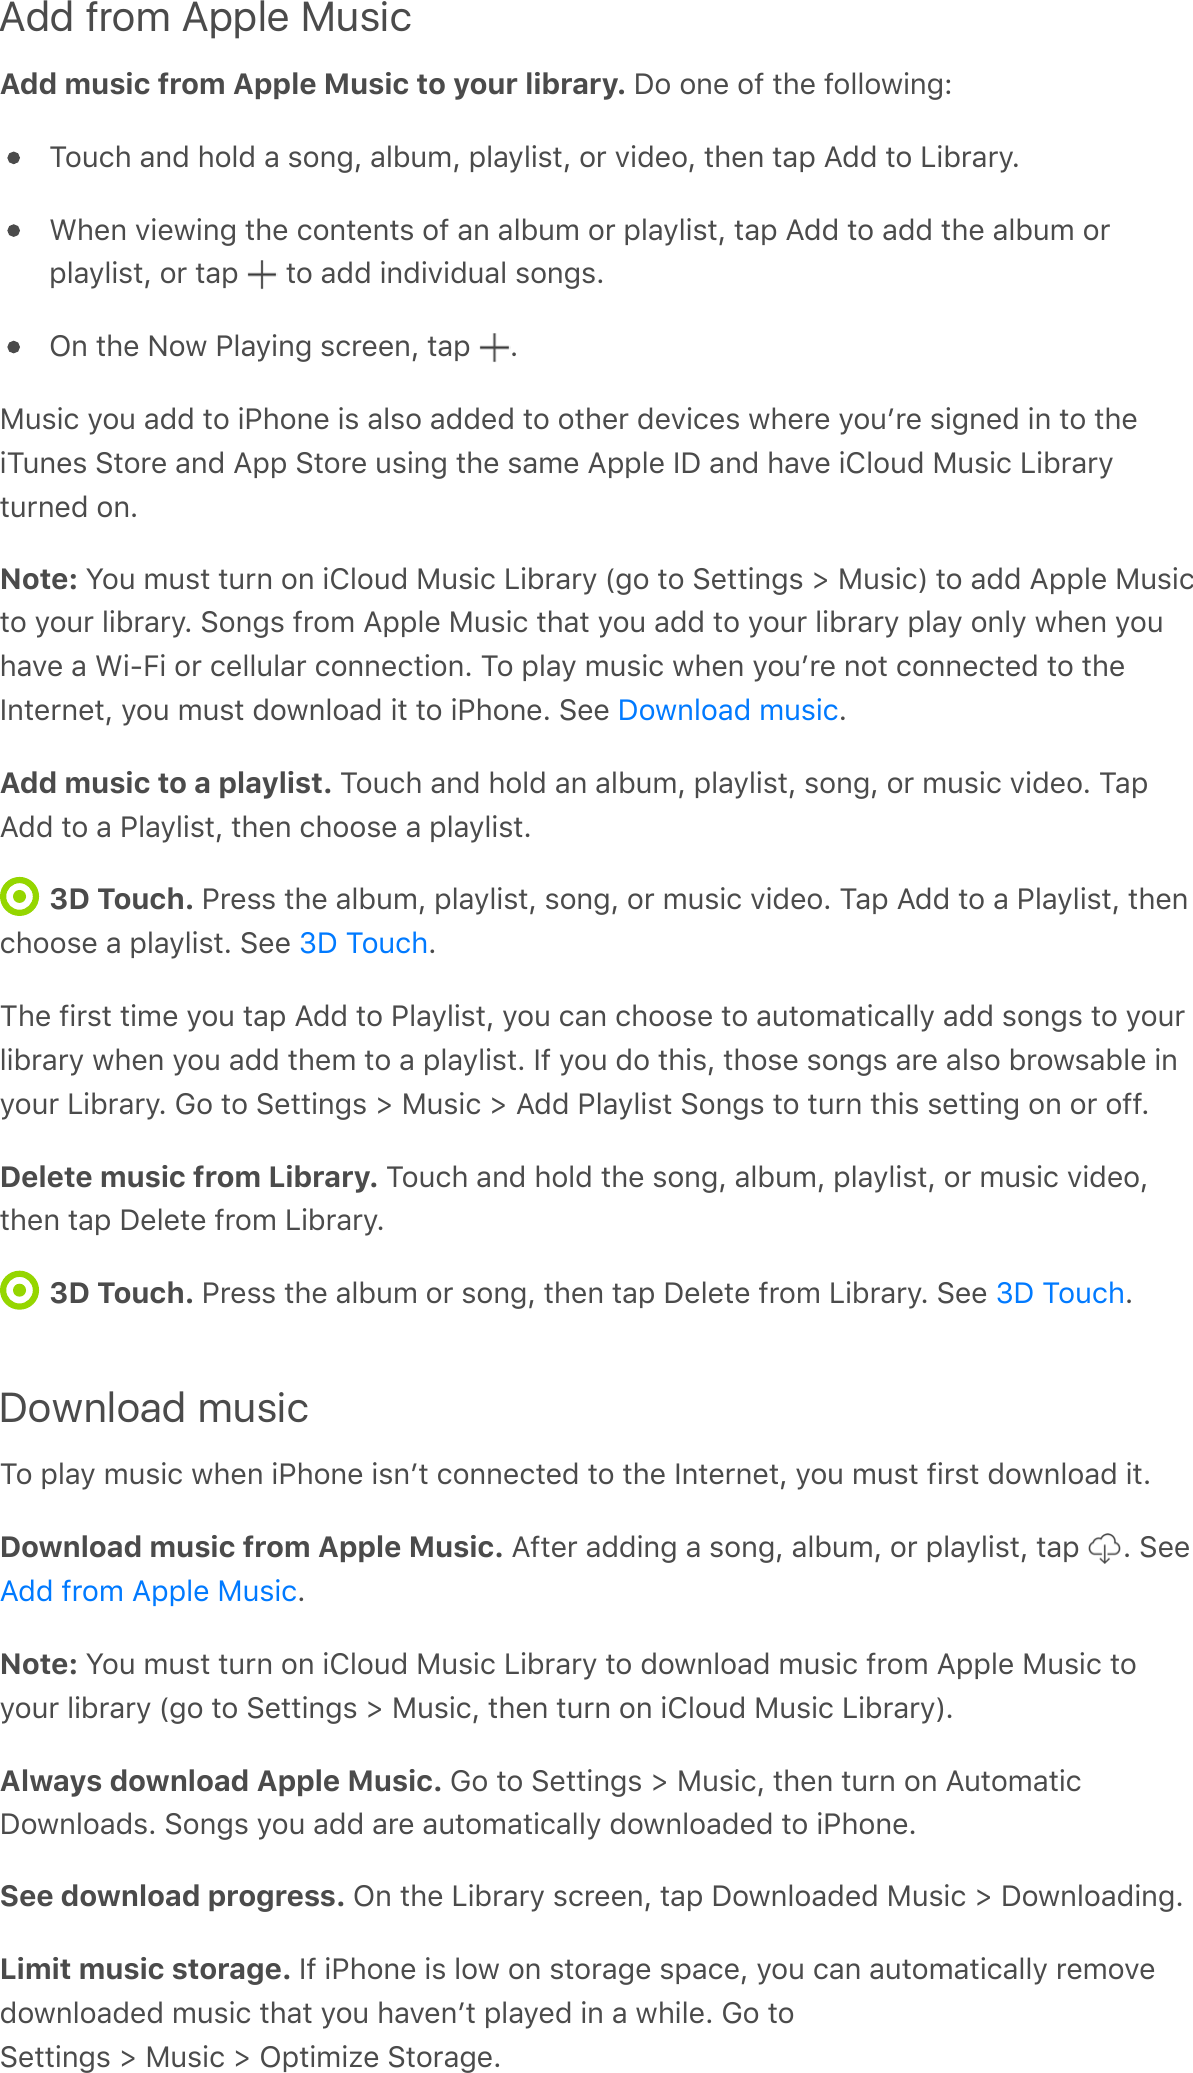 Add from Apple MusicAdd music from Apple Music to your library. !&quot;&amp;&quot;#.&amp;&quot;8&amp;%1.&amp;8&quot;??&quot;H(#5M2&quot;091&amp;-#&lt;&amp;1&quot;?&lt;&amp;-&amp;)&quot;#5L&amp;-?@0&apos;L&amp;6?-/?()%L&amp;&quot;,&amp;:(&lt;.&quot;L&amp;%1.#&amp;%-6&amp;;&lt;&lt;&amp;%&quot;&amp;=(@,-,/AF1.#&amp;:(.H(#5&amp;%1.&amp;9&quot;#%.#%)&amp;&quot;8&amp;-#&amp;-?@0&apos;&amp;&quot;,&amp;6?-/?()%L&amp;%-6&amp;;&lt;&lt;&amp;%&quot;&amp;-&lt;&lt;&amp;%1.&amp;-?@0&apos;&amp;&quot;,6?-/?()%L&amp;&quot;,&amp;%-6&amp; &amp;%&quot;&amp;-&lt;&lt;&amp;(#&lt;(:(&lt;0-?&amp;)&quot;#5)AI#&amp;%1.&amp;&gt;&quot;H&amp;7?-/(#5&amp;)9,..#L&amp;%-6&amp; AB0)(9&amp;/&quot;0&amp;-&lt;&lt;&amp;%&quot;&amp;(71&quot;#.&amp;()&amp;-?)&quot;&amp;-&lt;&lt;.&lt;&amp;%&quot;&amp;&quot;%1.,&amp;&lt;.:(9.)&amp;H1.,.&amp;/&quot;0$,.&amp;)(5#.&lt;&amp;(#&amp;%&quot;&amp;%1.(20#.)&amp;E%&quot;,.&amp;-#&lt;&amp;;66&amp;E%&quot;,.&amp;0)(#5&amp;%1.&amp;)-&apos;.&amp;;66?.&amp;Q!&amp;-#&lt;&amp;1-:.&amp;(O?&quot;0&lt;&amp;B0)(9&amp;=(@,-,/%0,#.&lt;&amp;&quot;#ANote: N&quot;0&amp;&apos;0)%&amp;%0,#&amp;&quot;#&amp;(O?&quot;0&lt;&amp;B0)(9&amp;=(@,-,/&amp;^5&quot;&amp;%&quot;&amp;E.%%(#5)&amp;d&amp;B0)(9_&amp;%&quot;&amp;-&lt;&lt;&amp;;66?.&amp;B0)(9%&quot;&amp;/&quot;0,&amp;?(@,-,/A&amp;E&quot;#5)&amp;8,&quot;&apos;&amp;;66?.&amp;B0)(9&amp;%1-%&amp;/&quot;0&amp;-&lt;&lt;&amp;%&quot;&amp;/&quot;0,&amp;?(@,-,/&amp;6?-/&amp;&quot;#?/&amp;H1.#&amp;/&quot;01-:.&amp;-&amp;F(T+(&amp;&quot;,&amp;9.??0?-,&amp;9&quot;##.9%(&quot;#A&amp;2&quot;&amp;6?-/&amp;&apos;0)(9&amp;H1.#&amp;/&quot;0$,.&amp;#&quot;%&amp;9&quot;##.9%.&lt;&amp;%&quot;&amp;%1.Q#%.,#.%L&amp;/&quot;0&amp;&apos;0)%&amp;&lt;&quot;H#?&quot;-&lt;&amp;(%&amp;%&quot;&amp;(71&quot;#.A&amp;E..&amp; AAdd music to a playlist. 2&quot;091&amp;-#&lt;&amp;1&quot;?&lt;&amp;-#&amp;-?@0&apos;L&amp;6?-/?()%L&amp;)&quot;#5L&amp;&quot;,&amp;&apos;0)(9&amp;:(&lt;.&quot;A&amp;2-6;&lt;&lt;&amp;%&quot;&amp;-&amp;7?-/?()%L&amp;%1.#&amp;91&quot;&quot;).&amp;-&amp;6?-/?()%A3D Touch. 7,.))&amp;%1.&amp;-?@0&apos;L&amp;6?-/?()%L&amp;)&quot;#5L&amp;&quot;,&amp;&apos;0)(9&amp;:(&lt;.&quot;A&amp;2-6&amp;;&lt;&lt;&amp;%&quot;&amp;-&amp;7?-/?()%L&amp;%1.#91&quot;&quot;).&amp;-&amp;6?-/?()%A&amp;E..&amp; A21.&amp;8(,)%&amp;%(&apos;.&amp;/&quot;0&amp;%-6&amp;;&lt;&lt;&amp;%&quot;&amp;7?-/?()%L&amp;/&quot;0&amp;9-#&amp;91&quot;&quot;).&amp;%&quot;&amp;-0%&quot;&apos;-%(9-??/&amp;-&lt;&lt;&amp;)&quot;#5)&amp;%&quot;&amp;/&quot;0,?(@,-,/&amp;H1.#&amp;/&quot;0&amp;-&lt;&lt;&amp;%1.&apos;&amp;%&quot;&amp;-&amp;6?-/?()%A&amp;Q8&amp;/&quot;0&amp;&lt;&quot;&amp;%1()L&amp;%1&quot;).&amp;)&quot;#5)&amp;-,.&amp;-?)&quot;&amp;@,&quot;H)-@?.&amp;(#/&quot;0,&amp;=(@,-,/A&amp;G&quot;&amp;%&quot;&amp;E.%%(#5)&amp;d&amp;B0)(9&amp;d&amp;;&lt;&lt;&amp;7?-/?()%&amp;E&quot;#5)&amp;%&quot;&amp;%0,#&amp;%1()&amp;).%%(#5&amp;&quot;#&amp;&quot;,&amp;&quot;88ADelete music from Library. 2&quot;091&amp;-#&lt;&amp;1&quot;?&lt;&amp;%1.&amp;)&quot;#5L&amp;-?@0&apos;L&amp;6?-/?()%L&amp;&quot;,&amp;&apos;0)(9&amp;:(&lt;.&quot;L%1.#&amp;%-6&amp;!.?.%.&amp;8,&quot;&apos;&amp;=(@,-,/A3D Touch. 7,.))&amp;%1.&amp;-?@0&apos;&amp;&quot;,&amp;)&quot;#5L&amp;%1.#&amp;%-6&amp;!.?.%.&amp;8,&quot;&apos;&amp;=(@,-,/A&amp;E..&amp; ADownload music2&quot;&amp;6?-/&amp;&apos;0)(9&amp;H1.#&amp;(71&quot;#.&amp;()#$%&amp;9&quot;##.9%.&lt;&amp;%&quot;&amp;%1.&amp;Q#%.,#.%L&amp;/&quot;0&amp;&apos;0)%&amp;8(,)%&amp;&lt;&quot;H#?&quot;-&lt;&amp;(%ADownload music from Apple Music. ;8%.,&amp;-&lt;&lt;(#5&amp;-&amp;)&quot;#5L&amp;-?@0&apos;L&amp;&quot;,&amp;6?-/?()%L&amp;%-6&amp; A&amp;E..ANote: N&quot;0&amp;&apos;0)%&amp;%0,#&amp;&quot;#&amp;(O?&quot;0&lt;&amp;B0)(9&amp;=(@,-,/&amp;%&quot;&amp;&lt;&quot;H#?&quot;-&lt;&amp;&apos;0)(9&amp;8,&quot;&apos;&amp;;66?.&amp;B0)(9&amp;%&quot;/&quot;0,&amp;?(@,-,/&amp;^5&quot;&amp;%&quot;&amp;E.%%(#5)&amp;d&amp;B0)(9L&amp;%1.#&amp;%0,#&amp;&quot;#&amp;(O?&quot;0&lt;&amp;B0)(9&amp;=(@,-,/_AAlways download Apple Music. G&quot;&amp;%&quot;&amp;E.%%(#5)&amp;d&amp;B0)(9L&amp;%1.#&amp;%0,#&amp;&quot;#&amp;;0%&quot;&apos;-%(9!&quot;H#?&quot;-&lt;)A&amp;E&quot;#5)&amp;/&quot;0&amp;-&lt;&lt;&amp;-,.&amp;-0%&quot;&apos;-%(9-??/&amp;&lt;&quot;H#?&quot;-&lt;.&lt;&amp;%&quot;&amp;(71&quot;#.ASee download progress. I#&amp;%1.&amp;=(@,-,/&amp;)9,..#L&amp;%-6&amp;!&quot;H#?&quot;-&lt;.&lt;&amp;B0)(9&amp;d&amp;!&quot;H#?&quot;-&lt;(#5ALimit music storage. Q8&amp;(71&quot;#.&amp;()&amp;?&quot;H&amp;&quot;#&amp;)%&quot;,-5.&amp;)6-9.L&amp;/&quot;0&amp;9-#&amp;-0%&quot;&apos;-%(9-??/&amp;,.&apos;&quot;:.&lt;&quot;H#?&quot;-&lt;.&lt;&amp;&apos;0)(9&amp;%1-%&amp;/&quot;0&amp;1-:.#$%&amp;6?-/.&lt;&amp;(#&amp;-&amp;H1(?.A&amp;G&quot;&amp;%&quot;E.%%(#5)&amp;d&amp;B0)(9&amp;d&amp;I6%(&apos;(4.&amp;E%&quot;,-5.A!&quot;H#?&quot;-&lt;&amp;&apos;0)(9]!&amp;2&quot;091]!&amp;2&quot;091;&lt;&lt;&amp;8,&quot;&apos;&amp;;66?.&amp;B0)(9